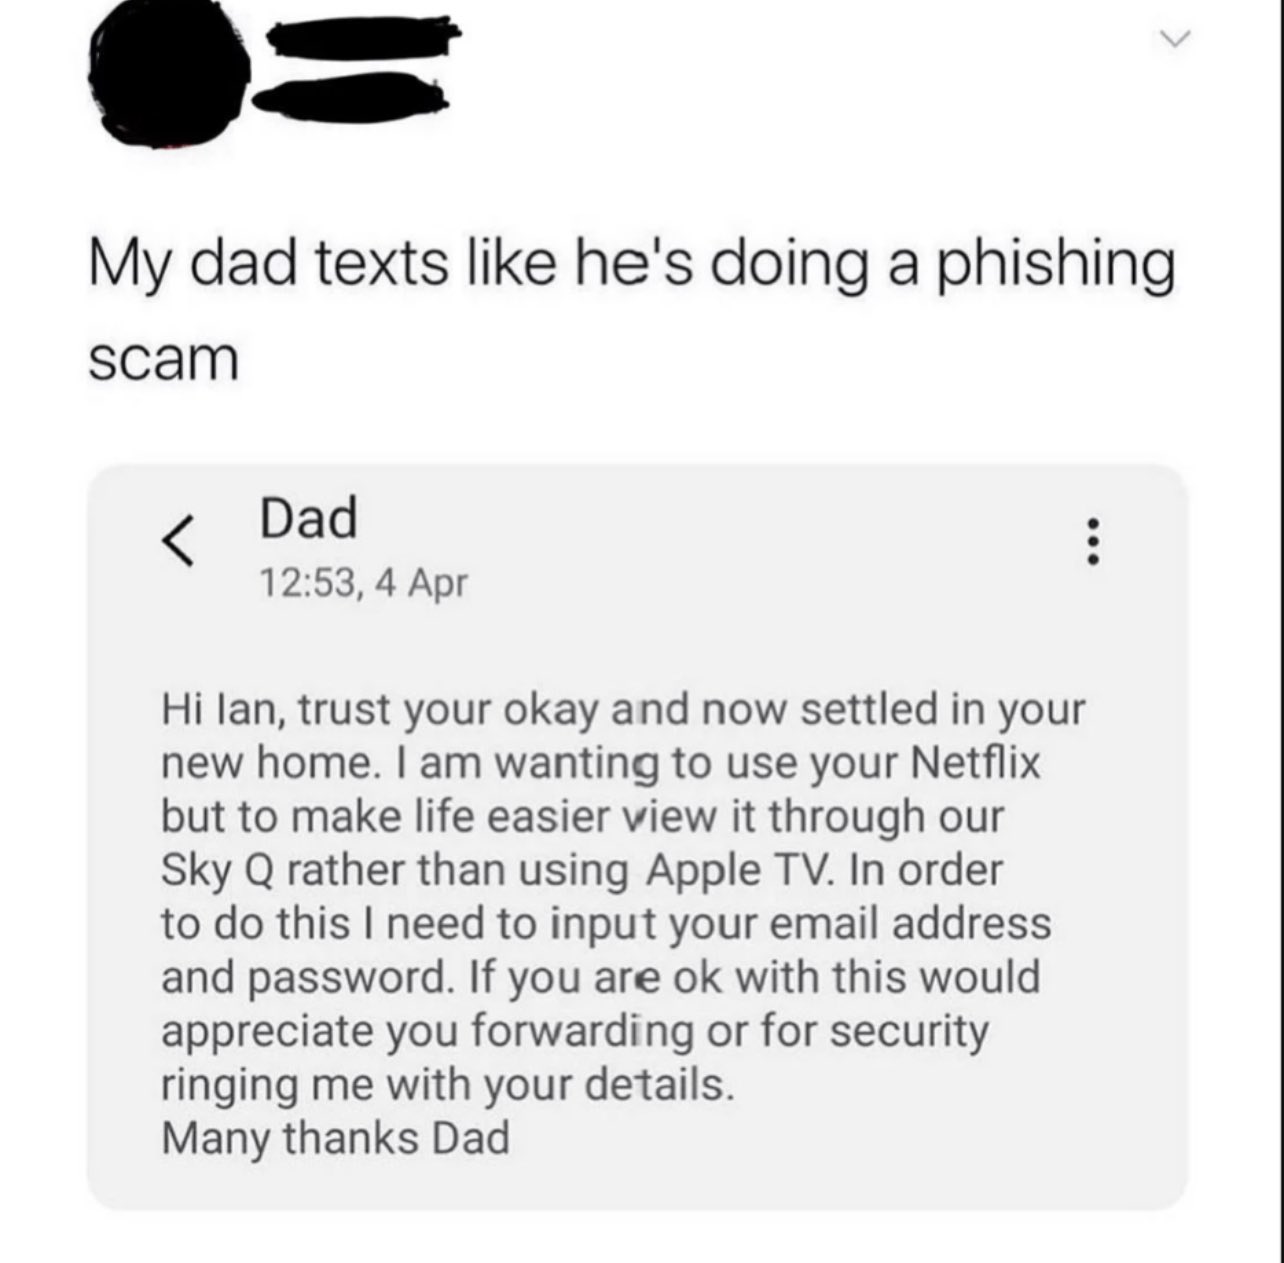 internet hall of  fame - Phishing - My dad texts he's doing a phishing scam